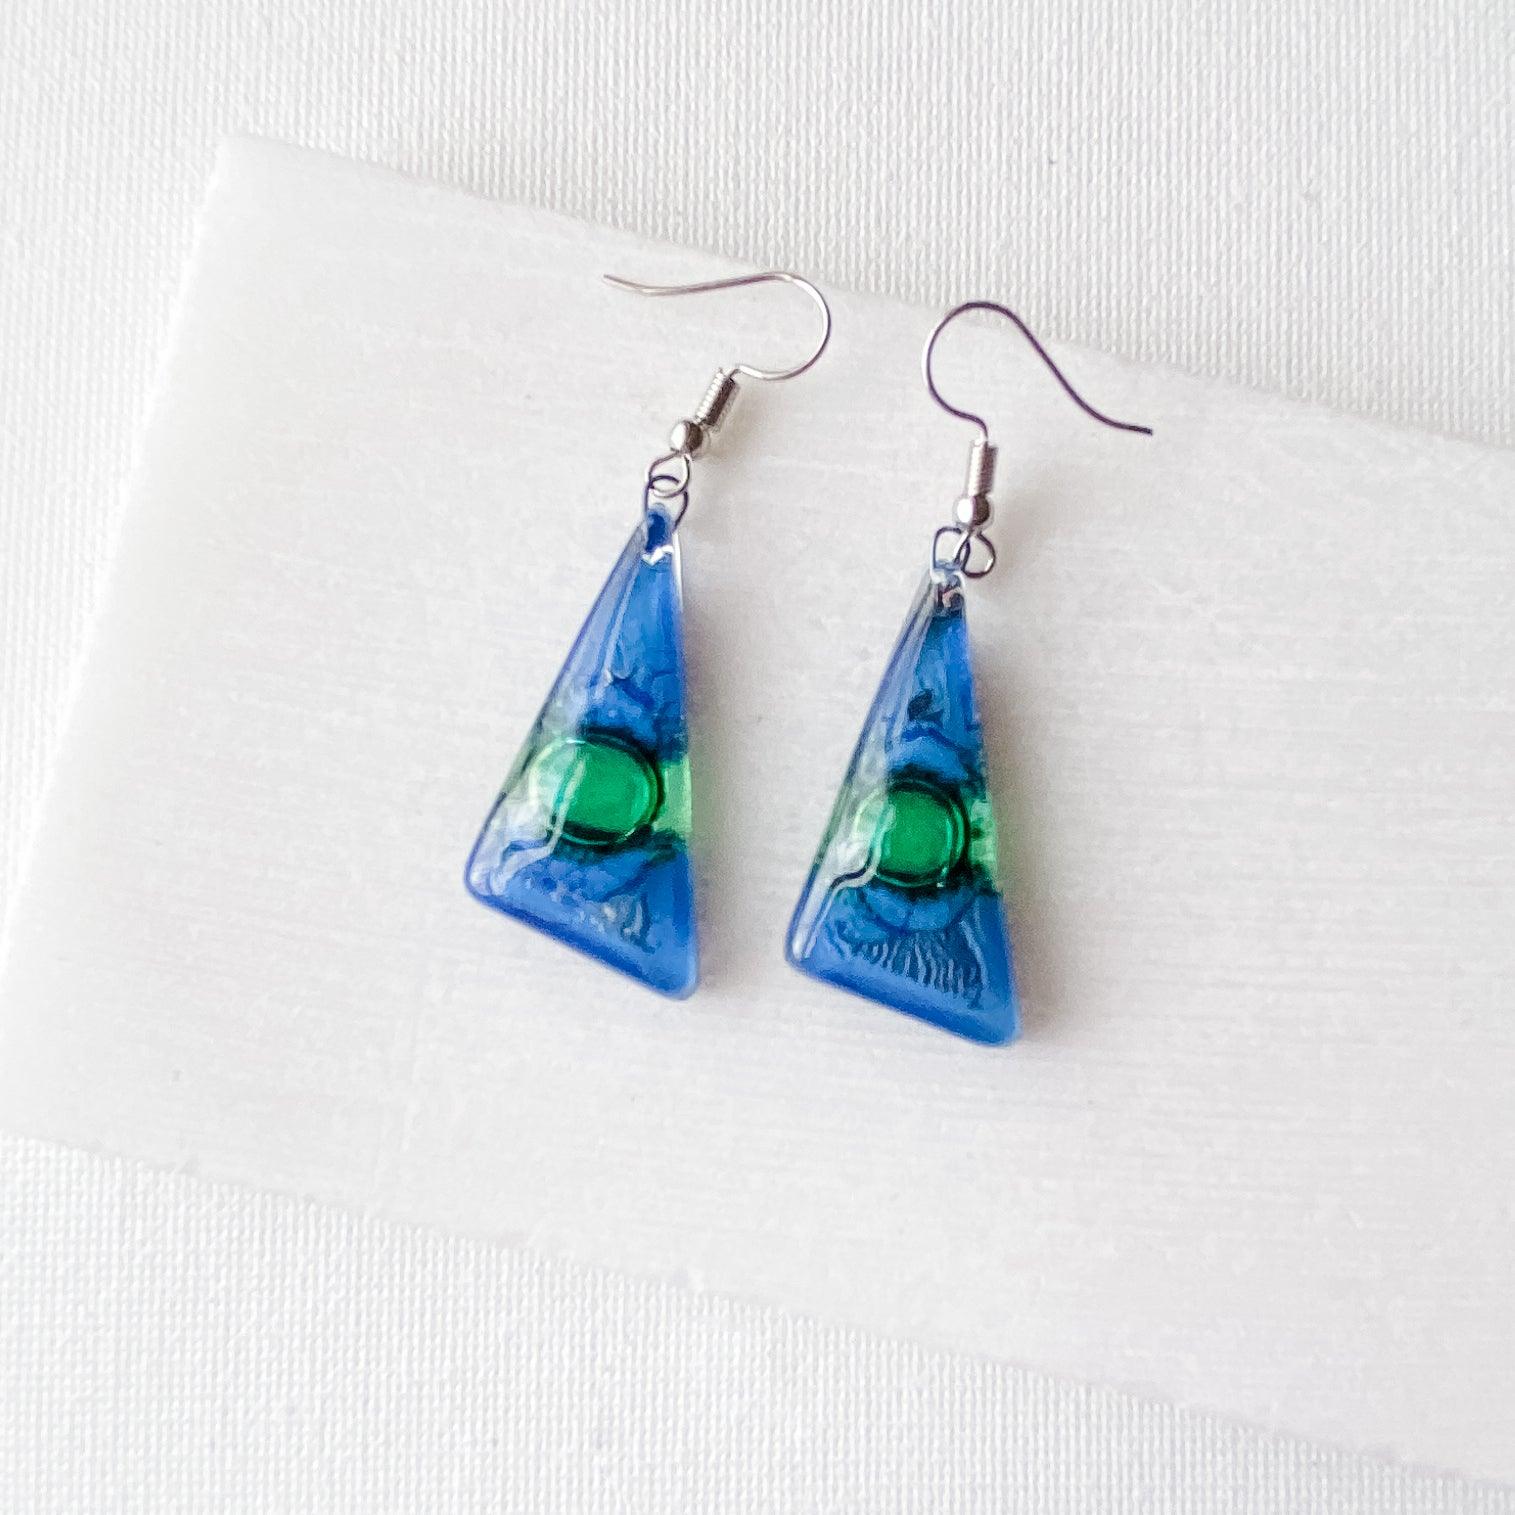 Recycled Fused Glass Earrings - Triangles Uni-T